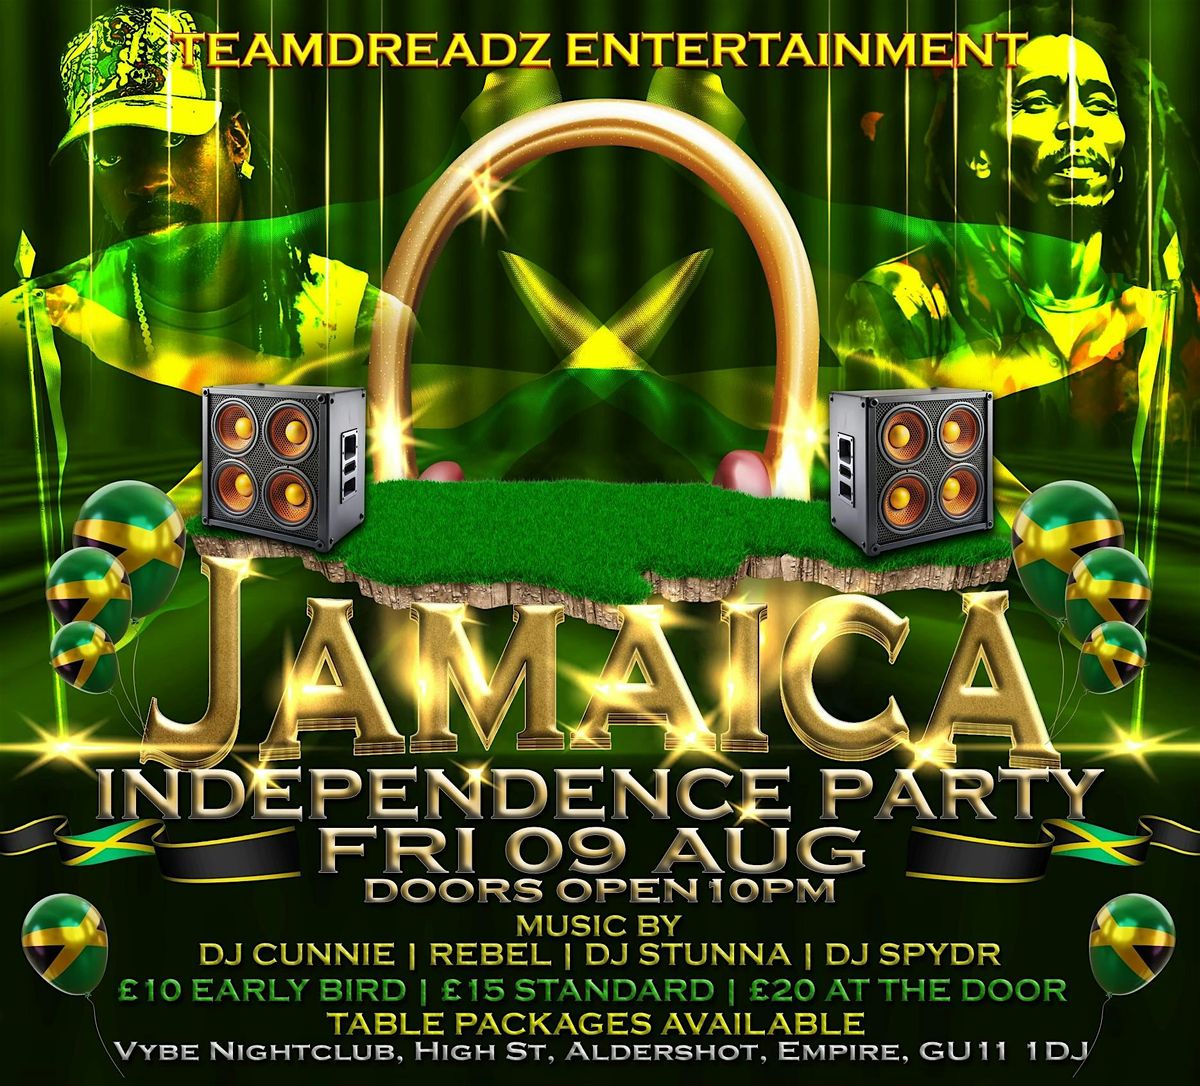 ROOTS JAMAICAN INDEPENDENCE PARTY